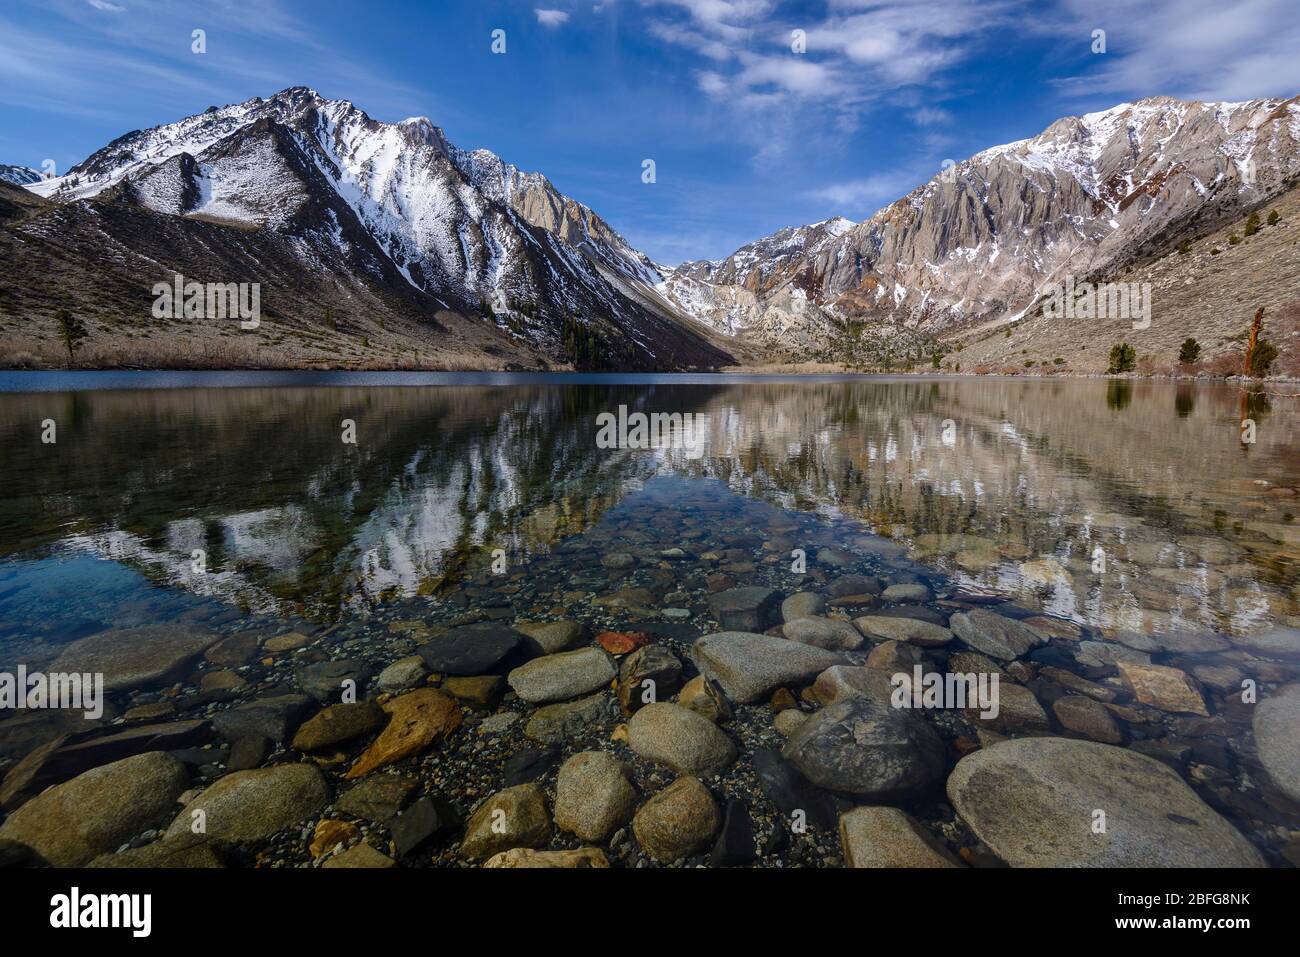 Convict Lake, Inyo National Forest, Sierra Nevada Mountains, California. Stock Photo